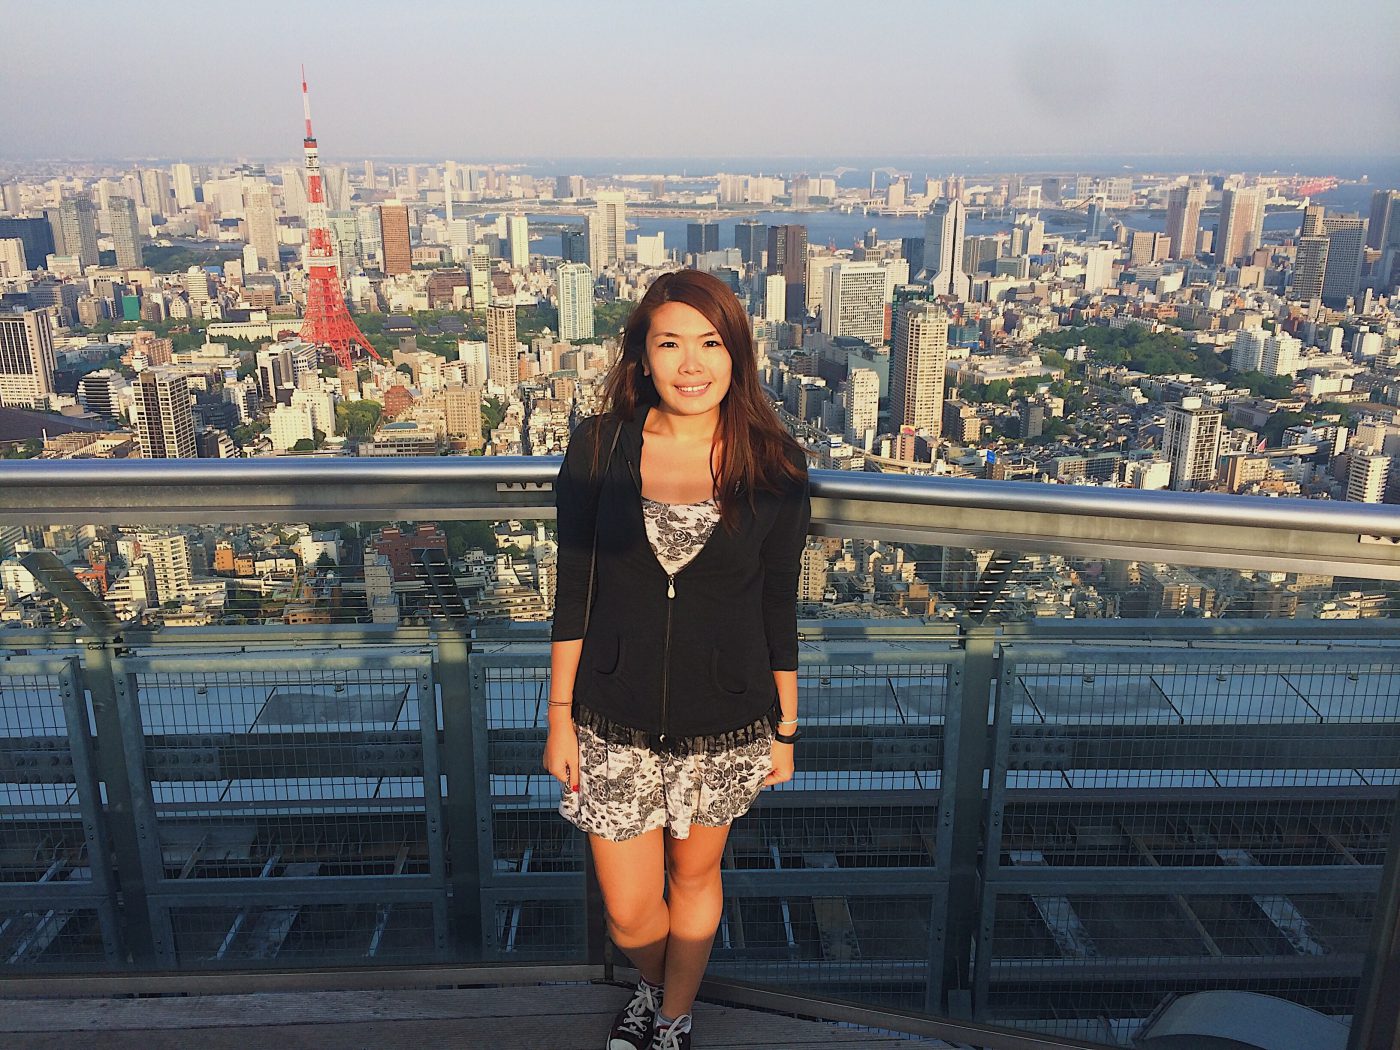 At the rooftop of Tokyo Skydeck in Roponggi